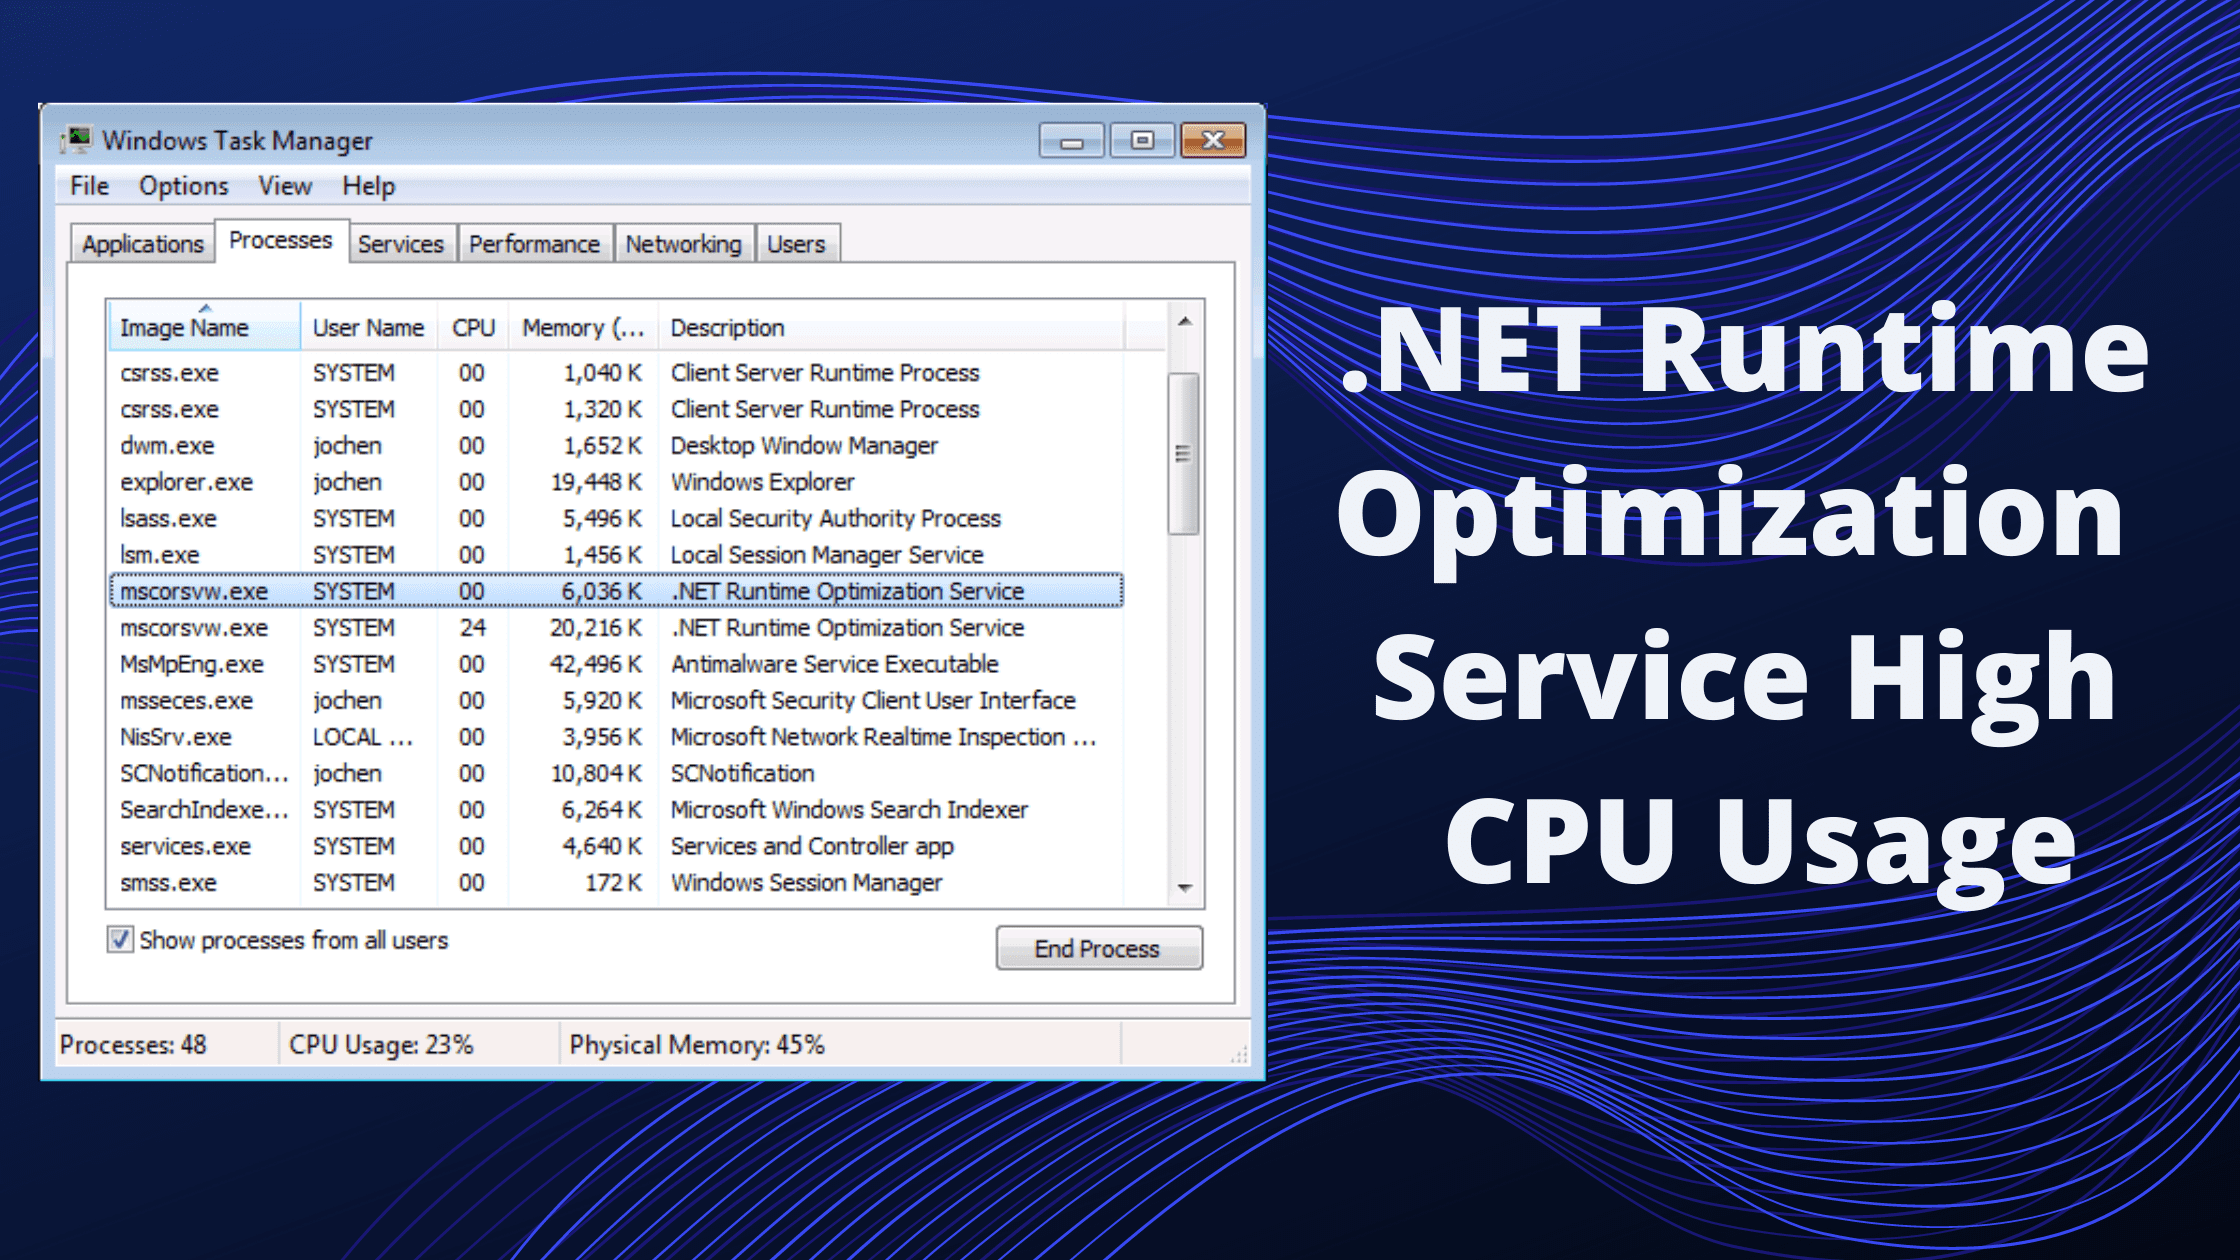 Check Task Manager for high CPU usage by the .NET Runtime Optimization Service Process
Check Event Viewer for any related error messages